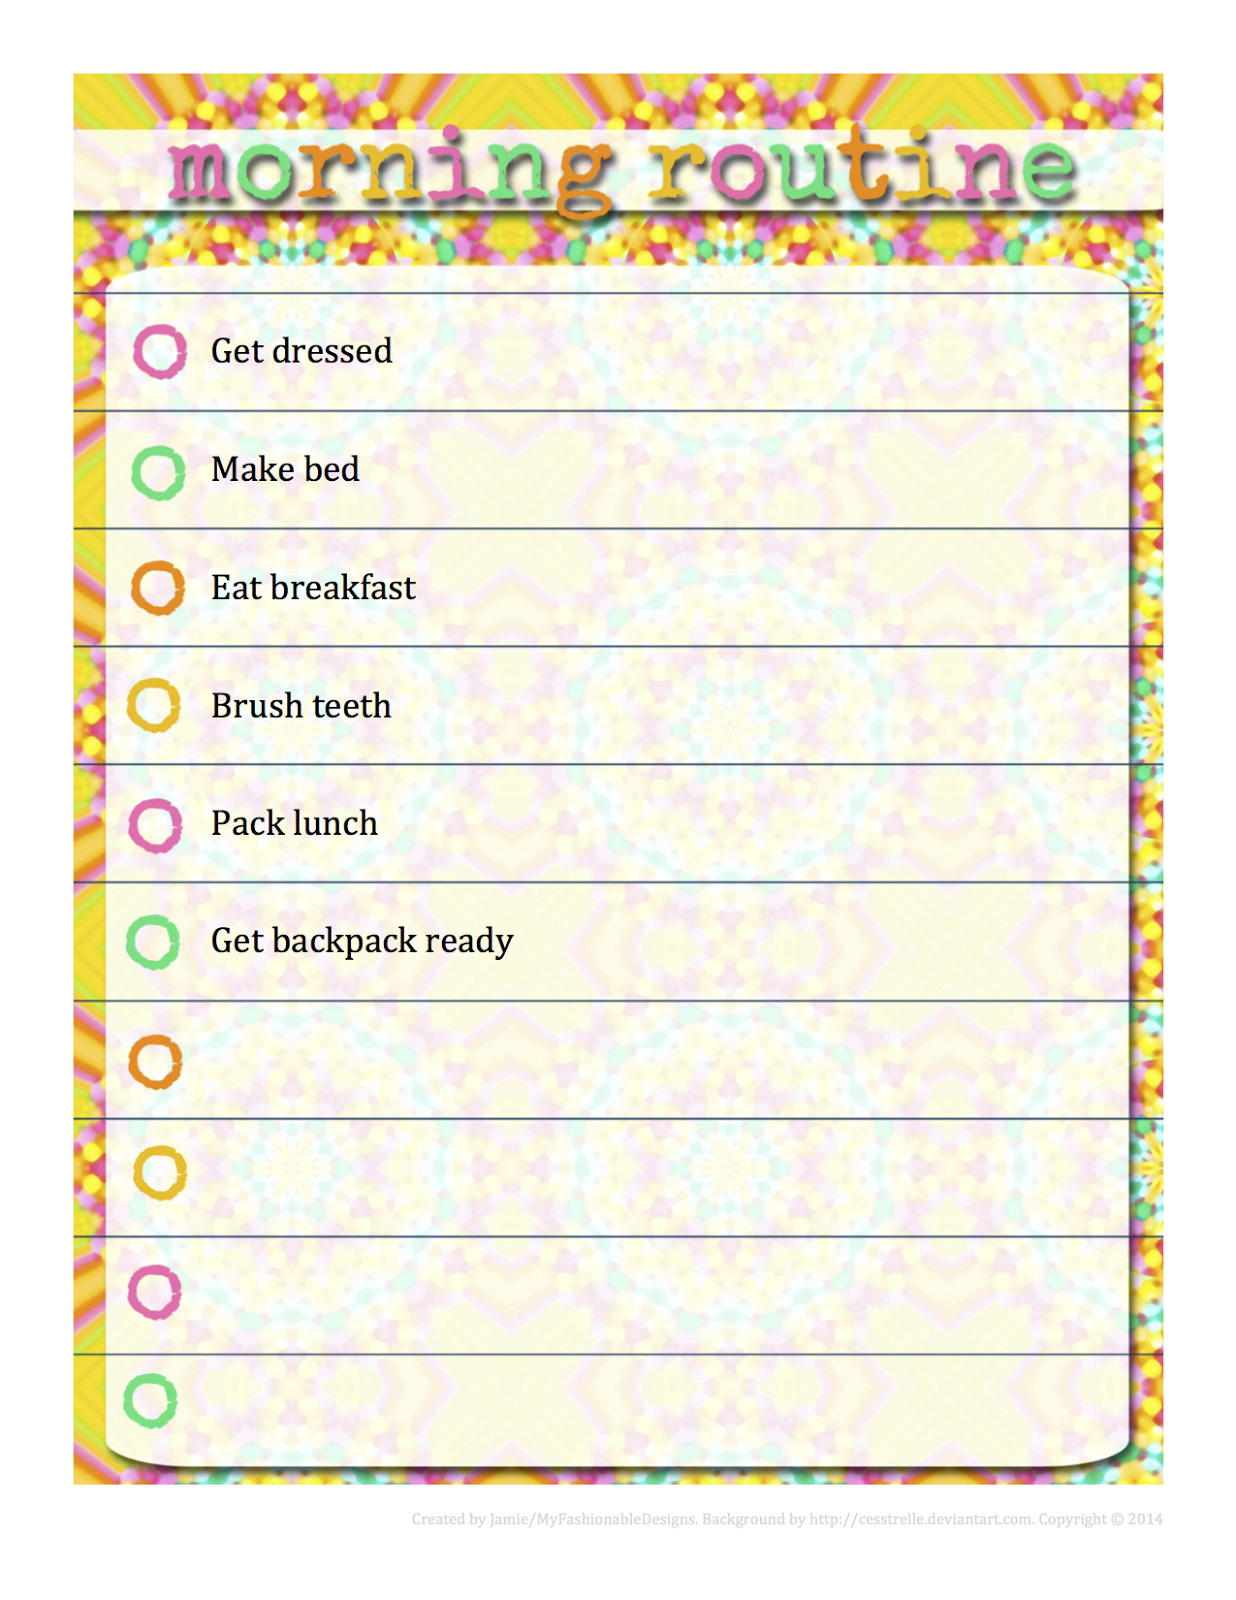 My Fashionable Designs Morning Routine Bedtime Routine FREE Download Editable In Word 